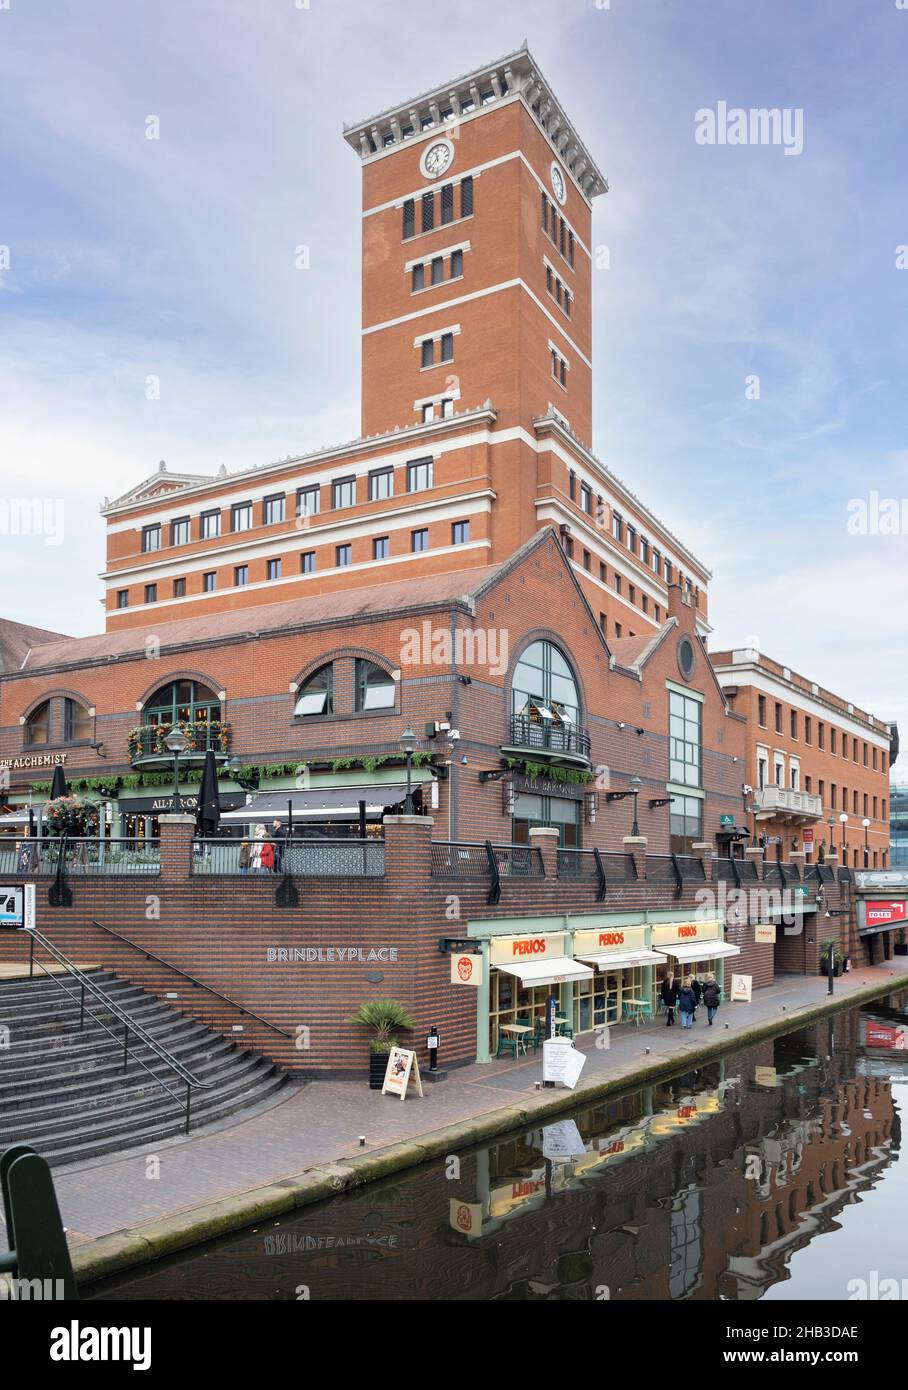 Brindleyplace buildings in Birmingham City Centre Stock Photo